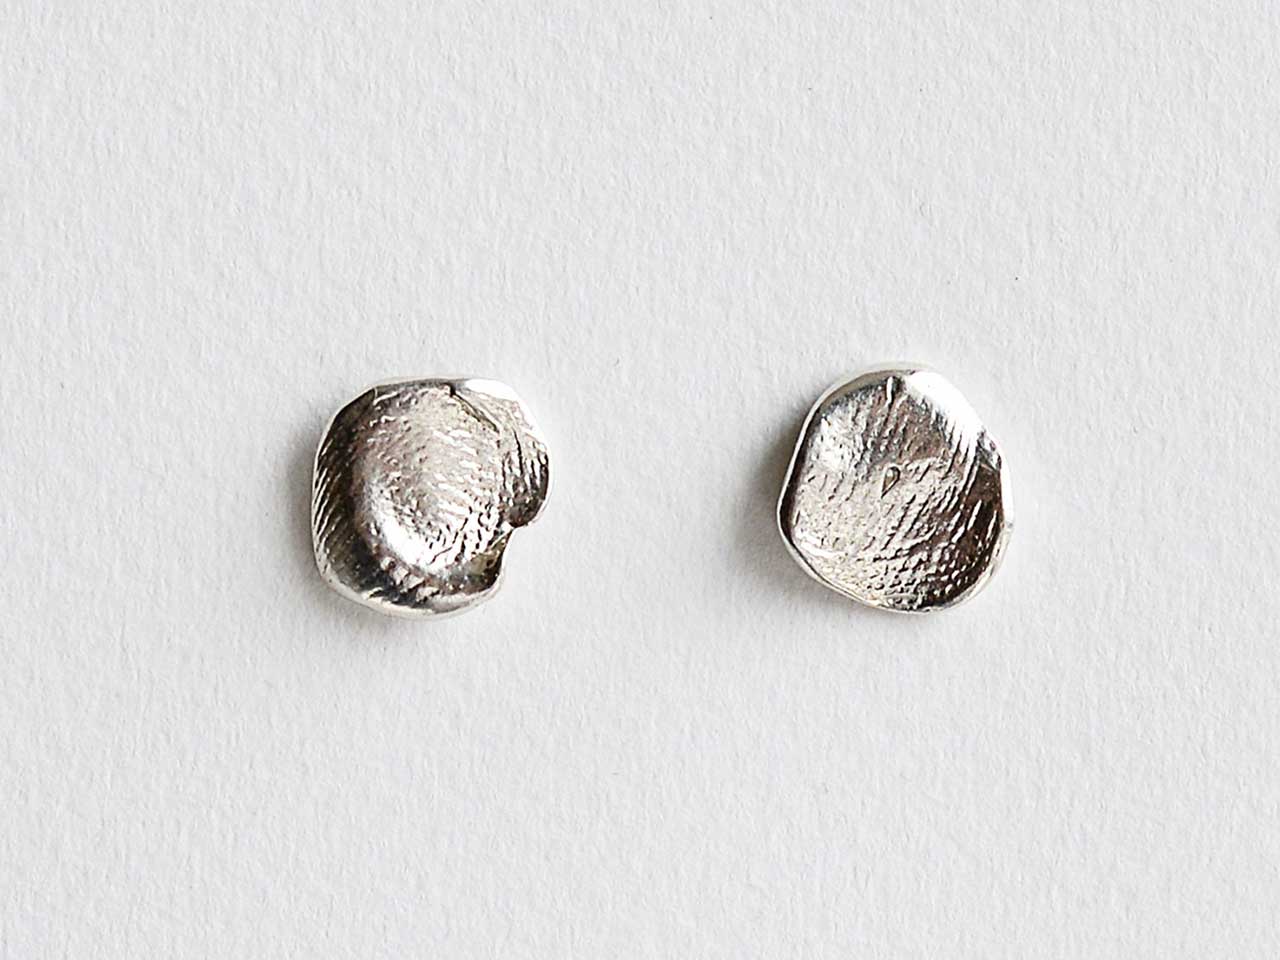 A silver jewellery pair of stud earrings from Canadian brand Michelle Ross.